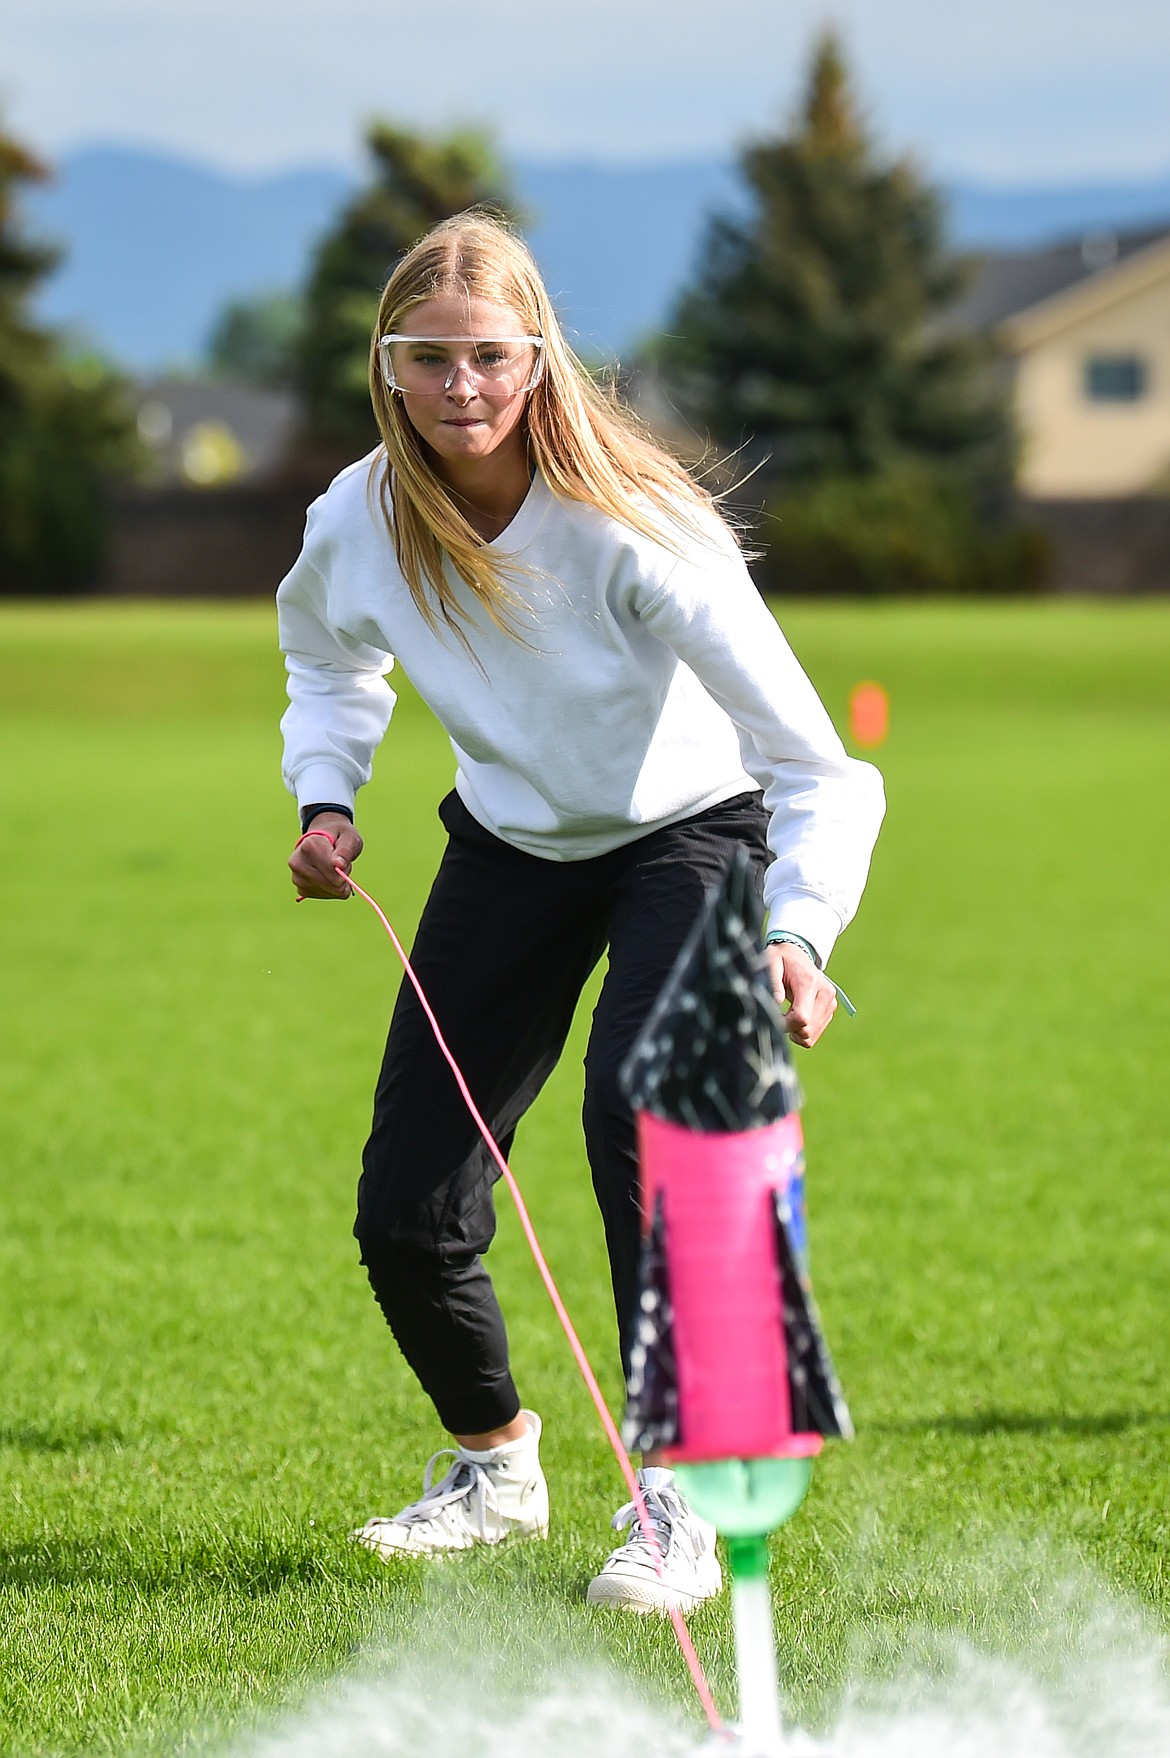 Caitlin Converse, of the Fancy Flying Flamingos team from Cayuse Prairie School, launches her team's water-powered rocket  at the Flathead Valley Rocket Rally outside Glacier High School on Thursday, May 25. On the team with Converse was Gracie Mae Kilmer and Mikayla King. (Casey Kreider/Daily Inter Lake)